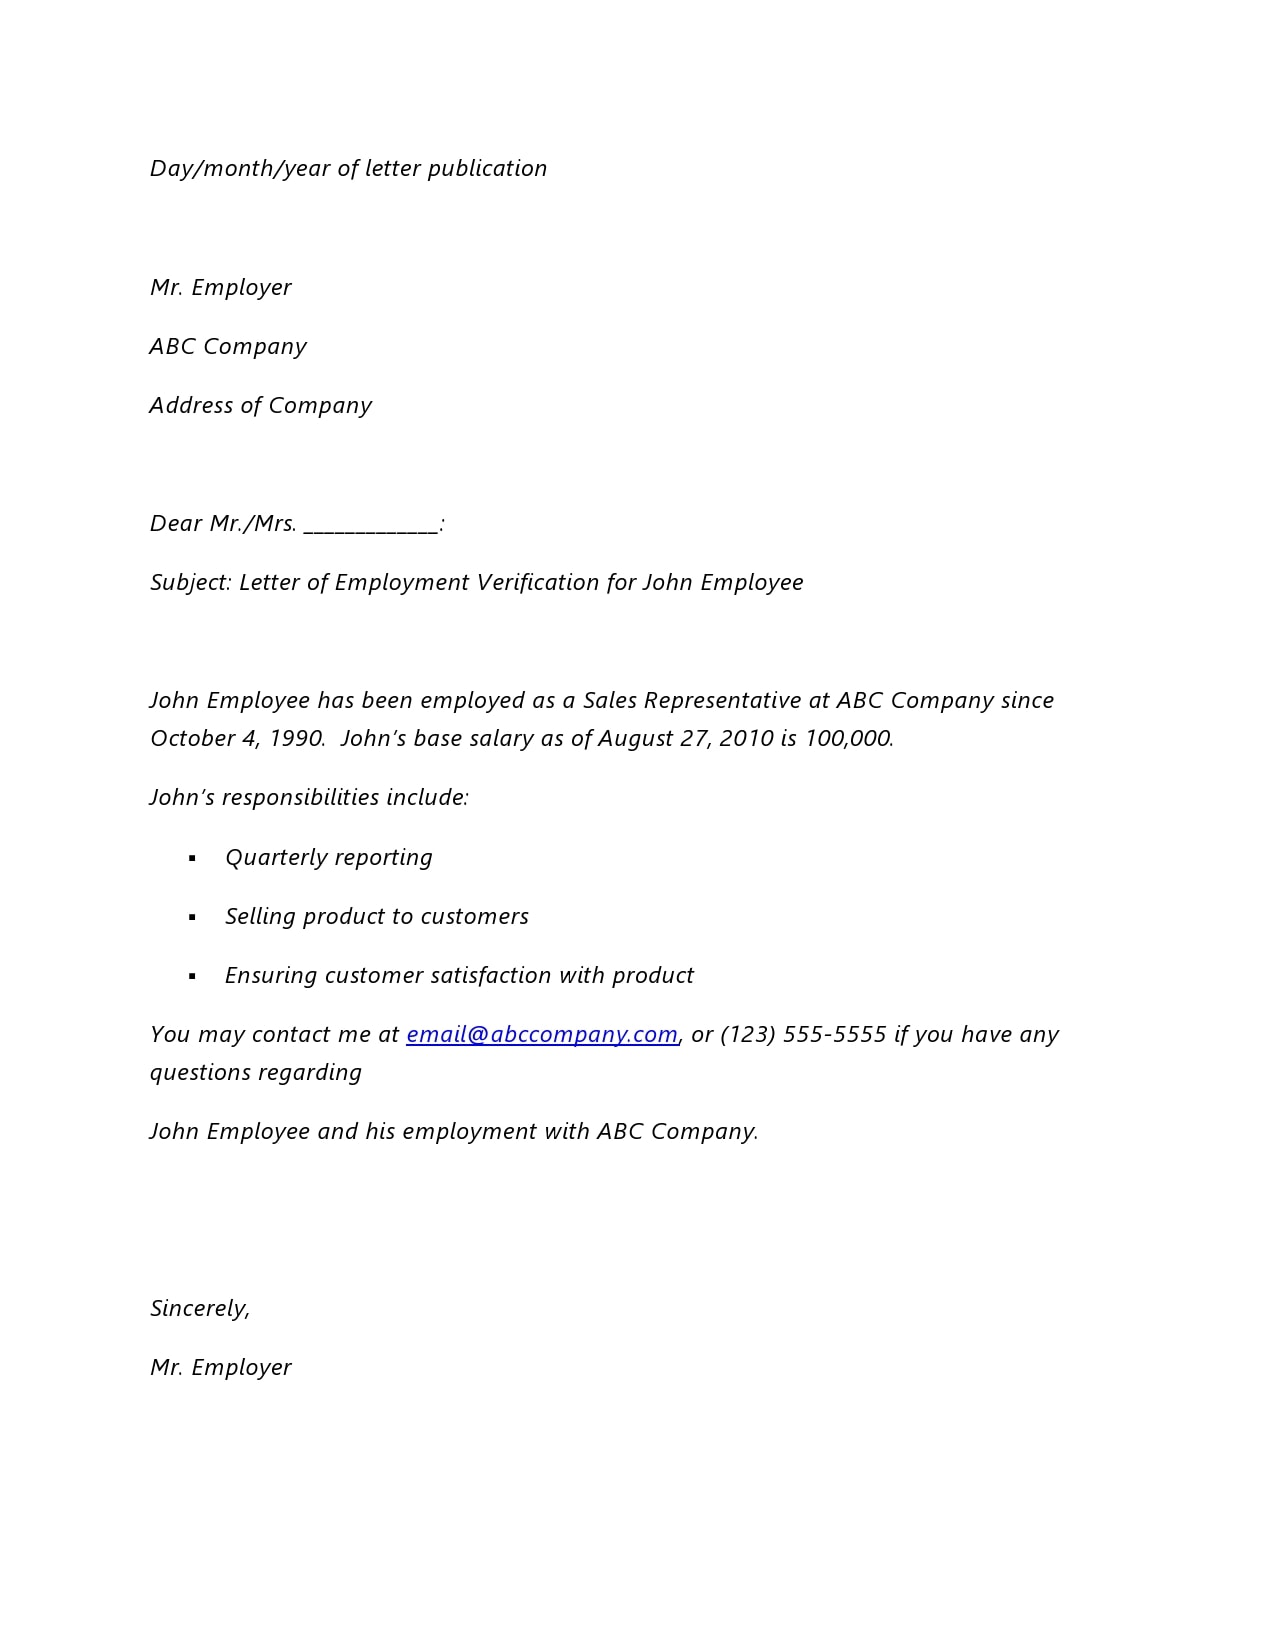 how to make an employment verification letter